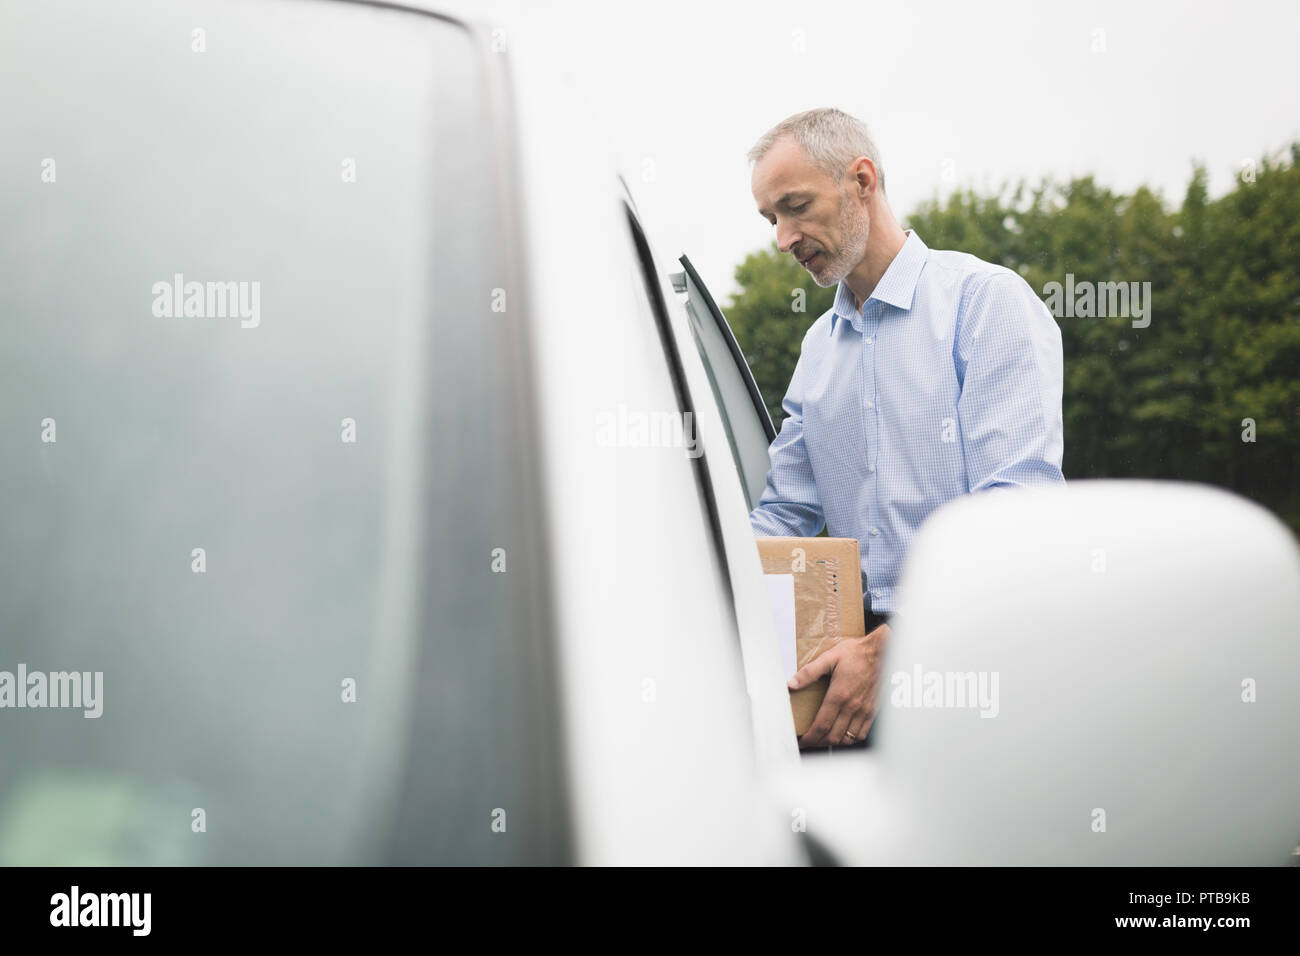 Delivery man unloading parcel from delivery van Stock Photo